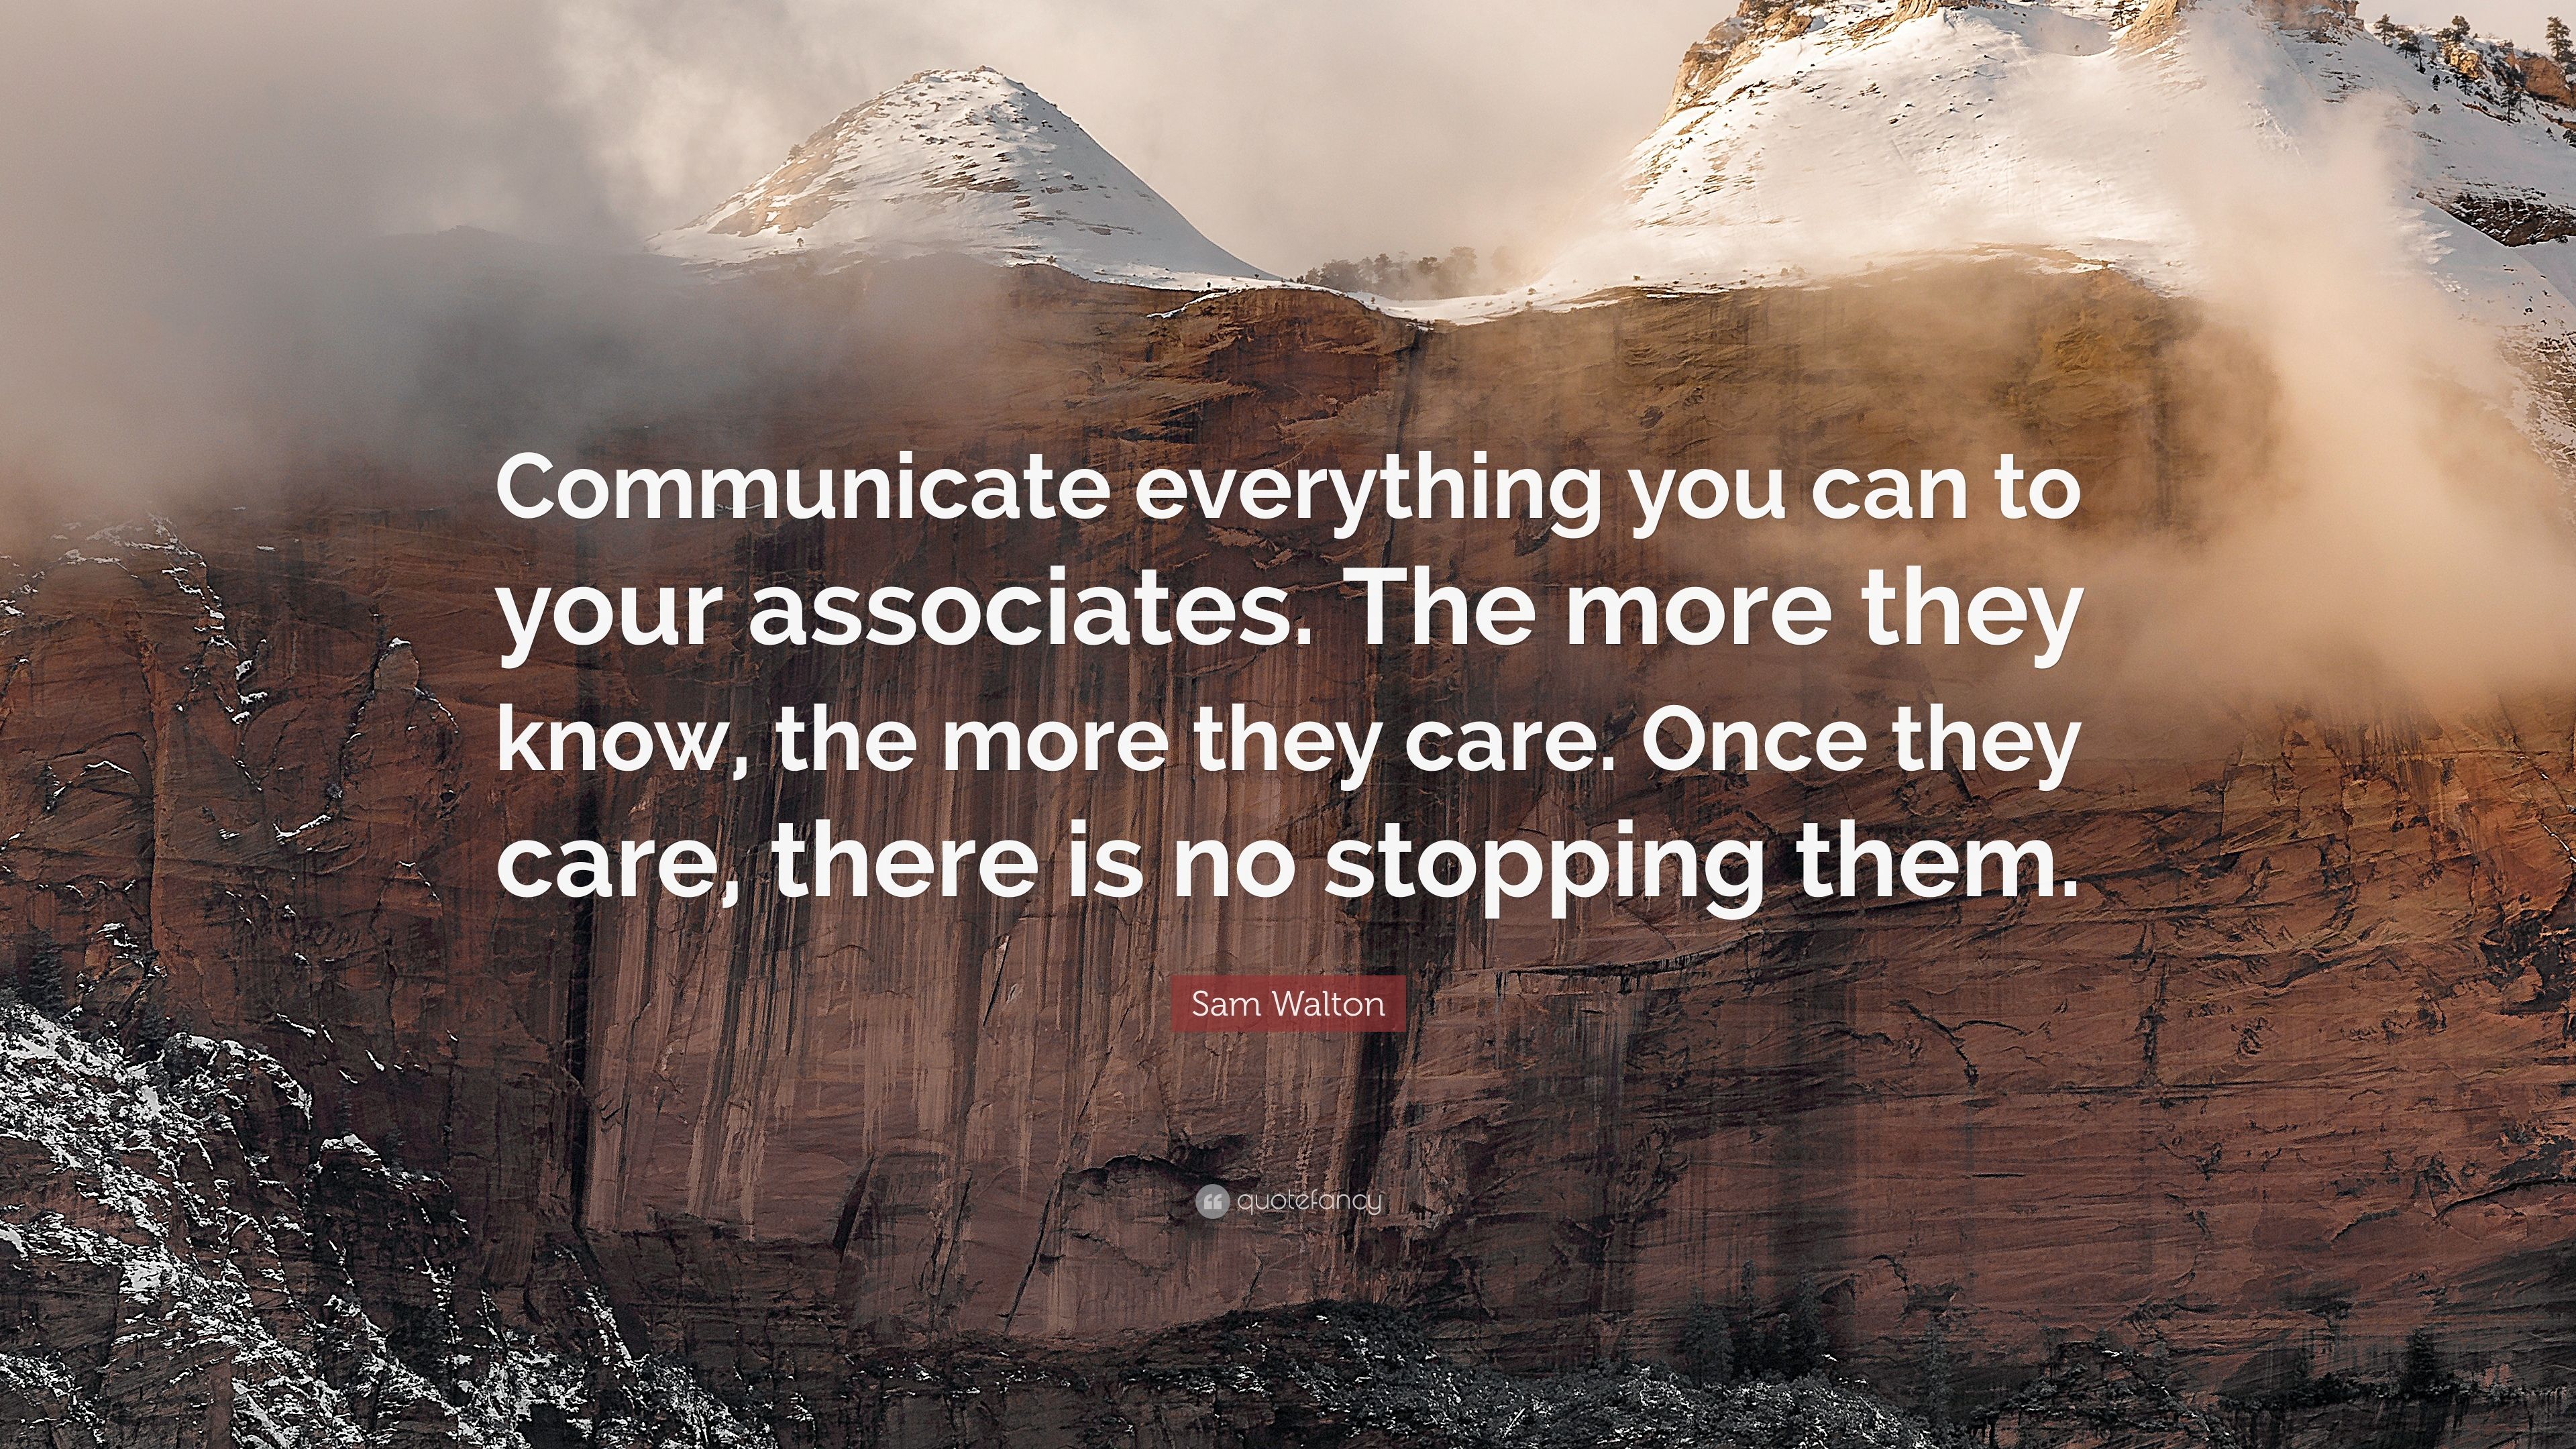 Sam Walton Quote: “Communicate everything you can to your